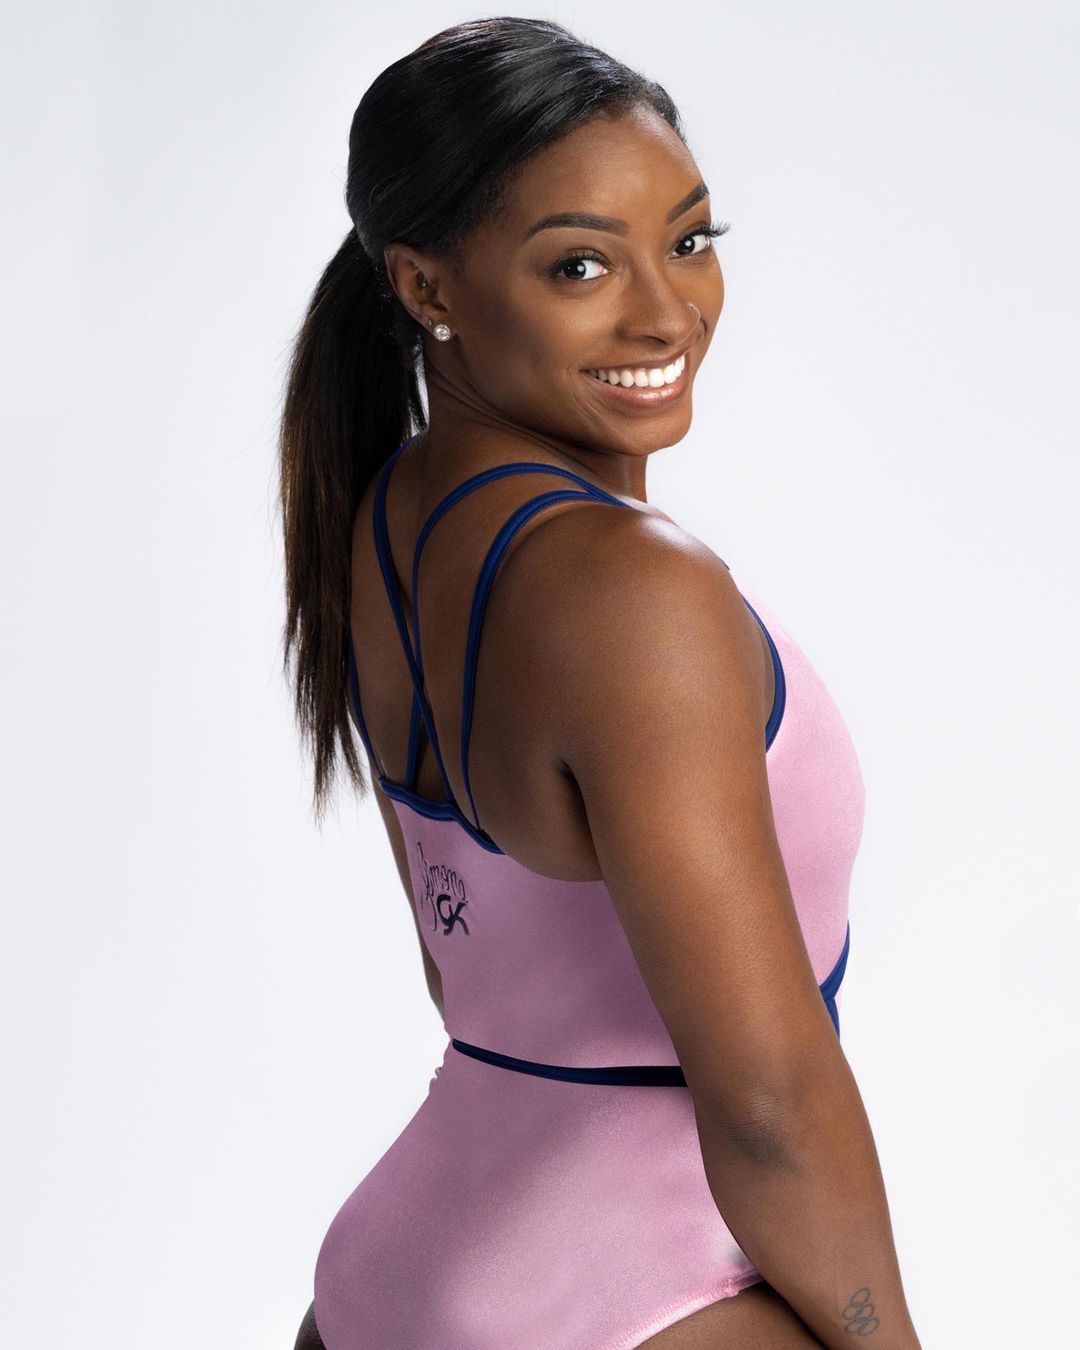 Simone Biles is not in contact with her biological father. 